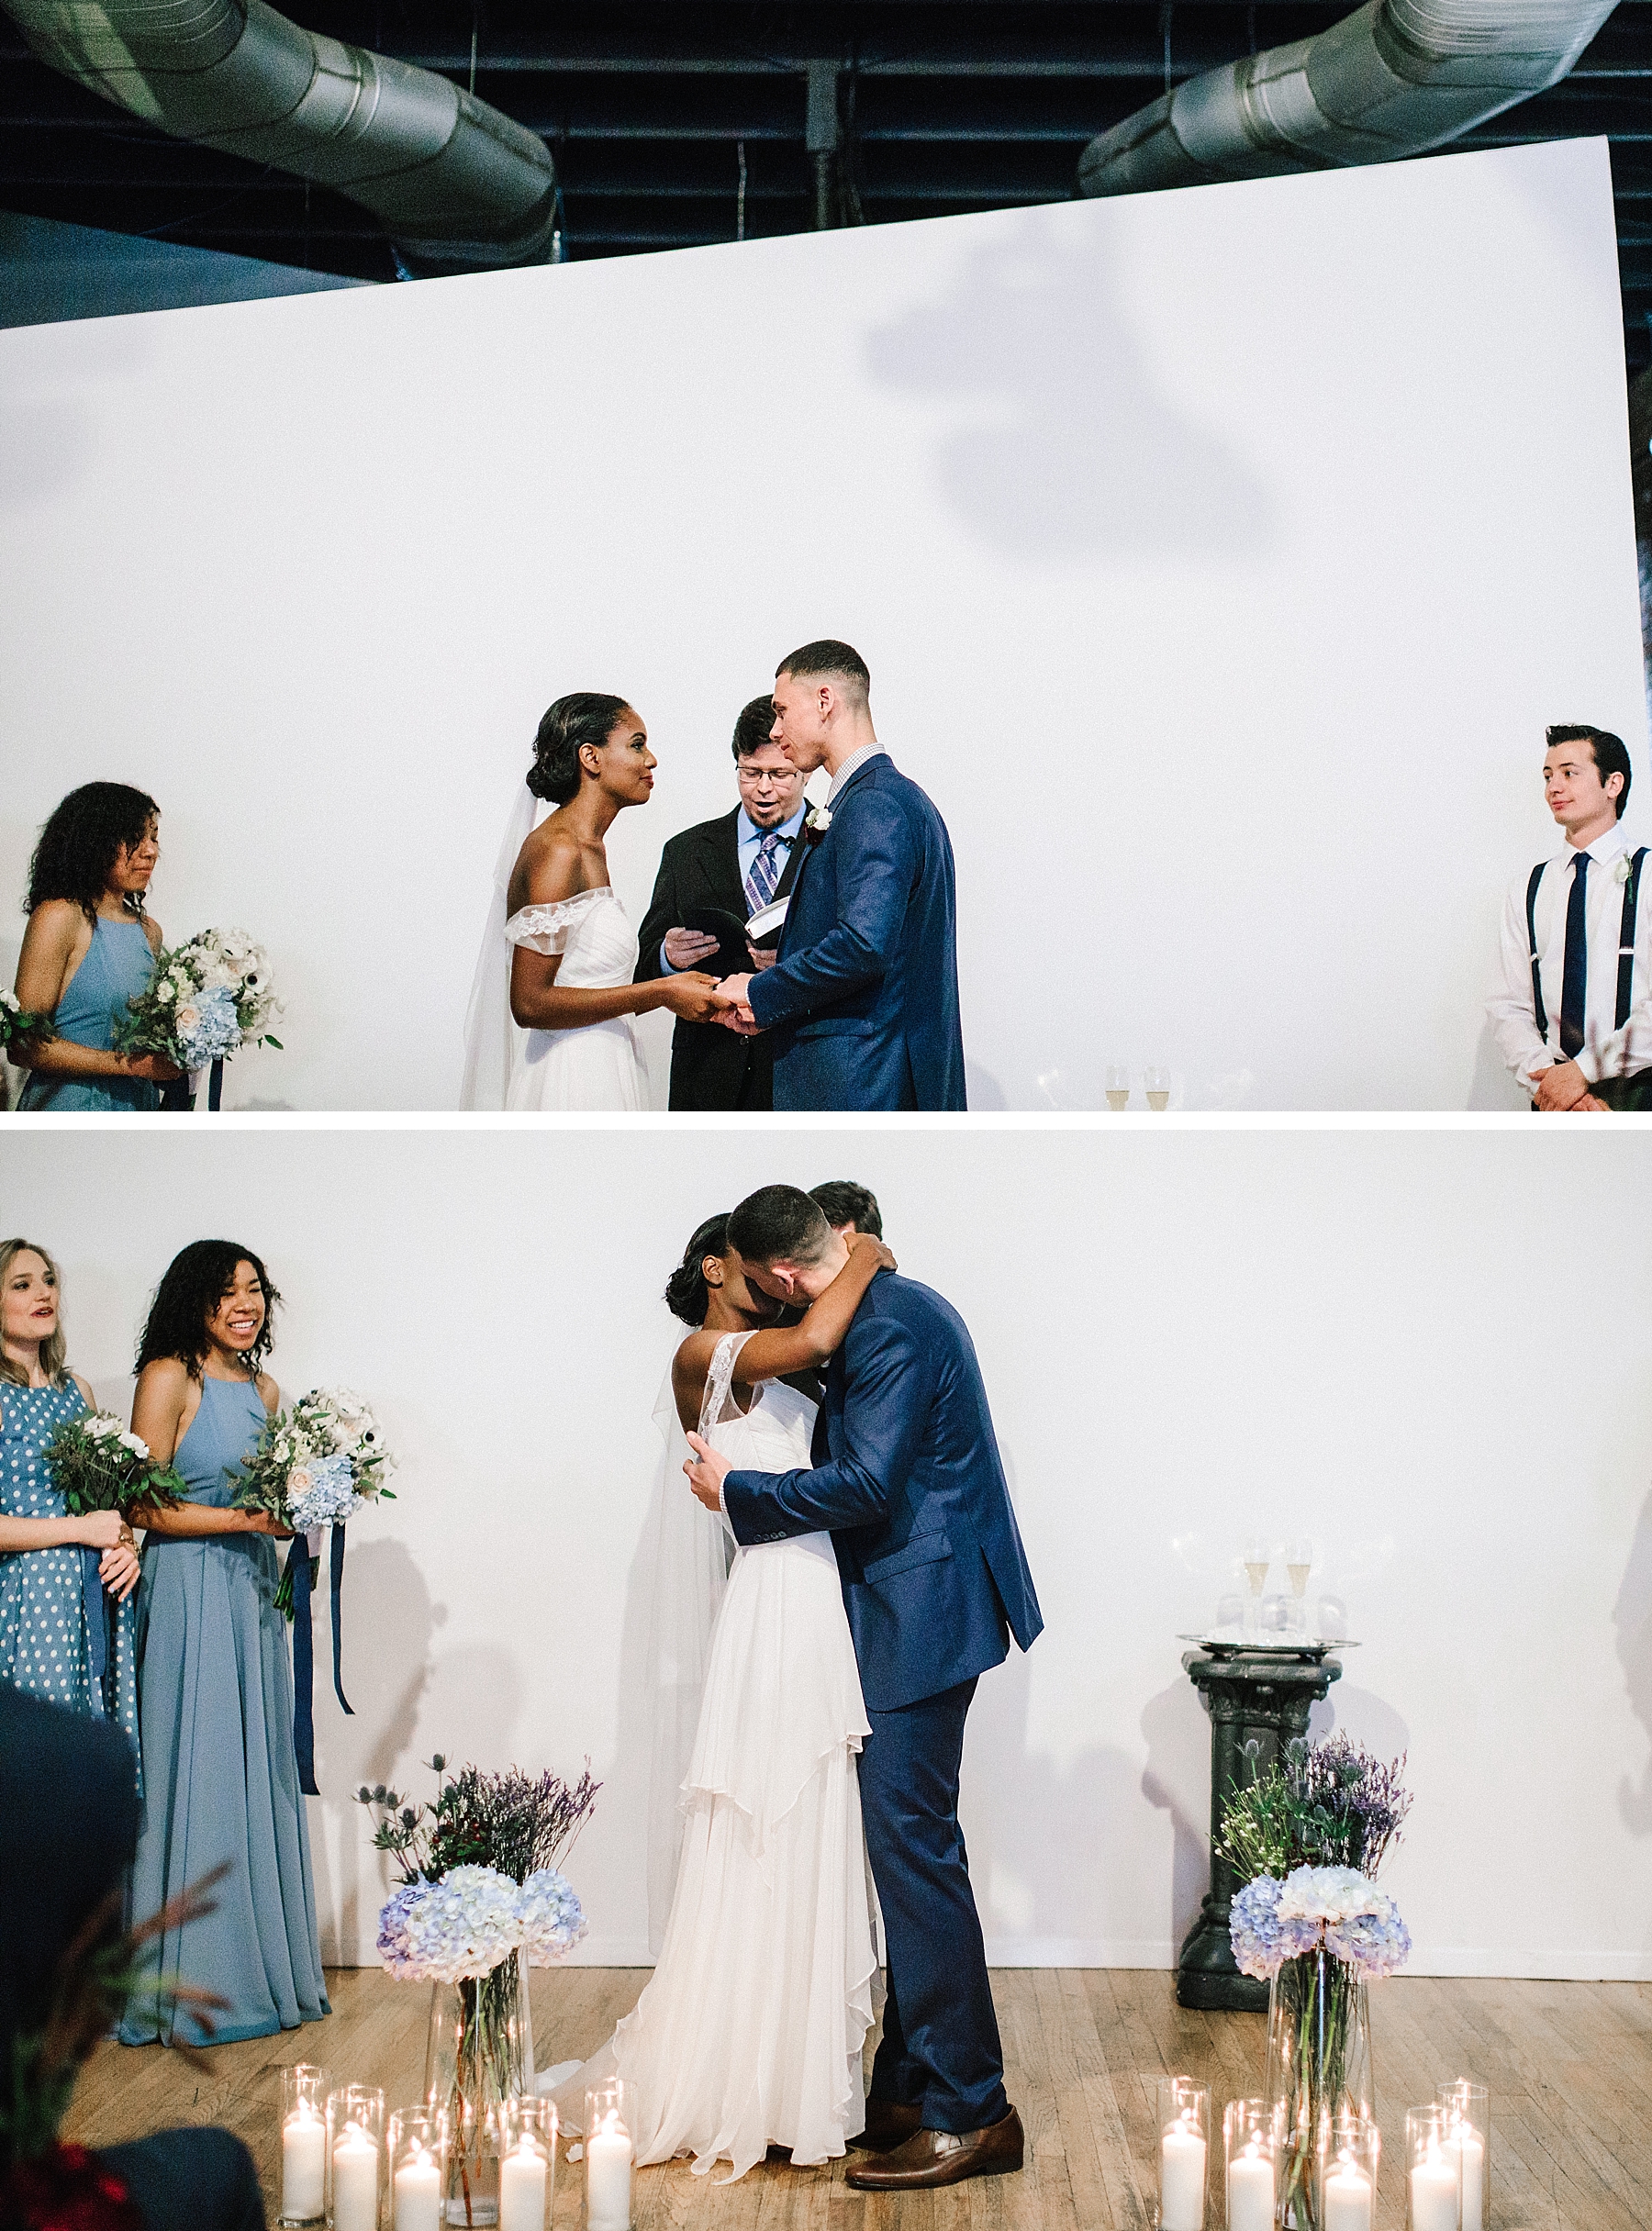 Ceremony Kiss at Event 1013 by Plano Wedding Photographer 